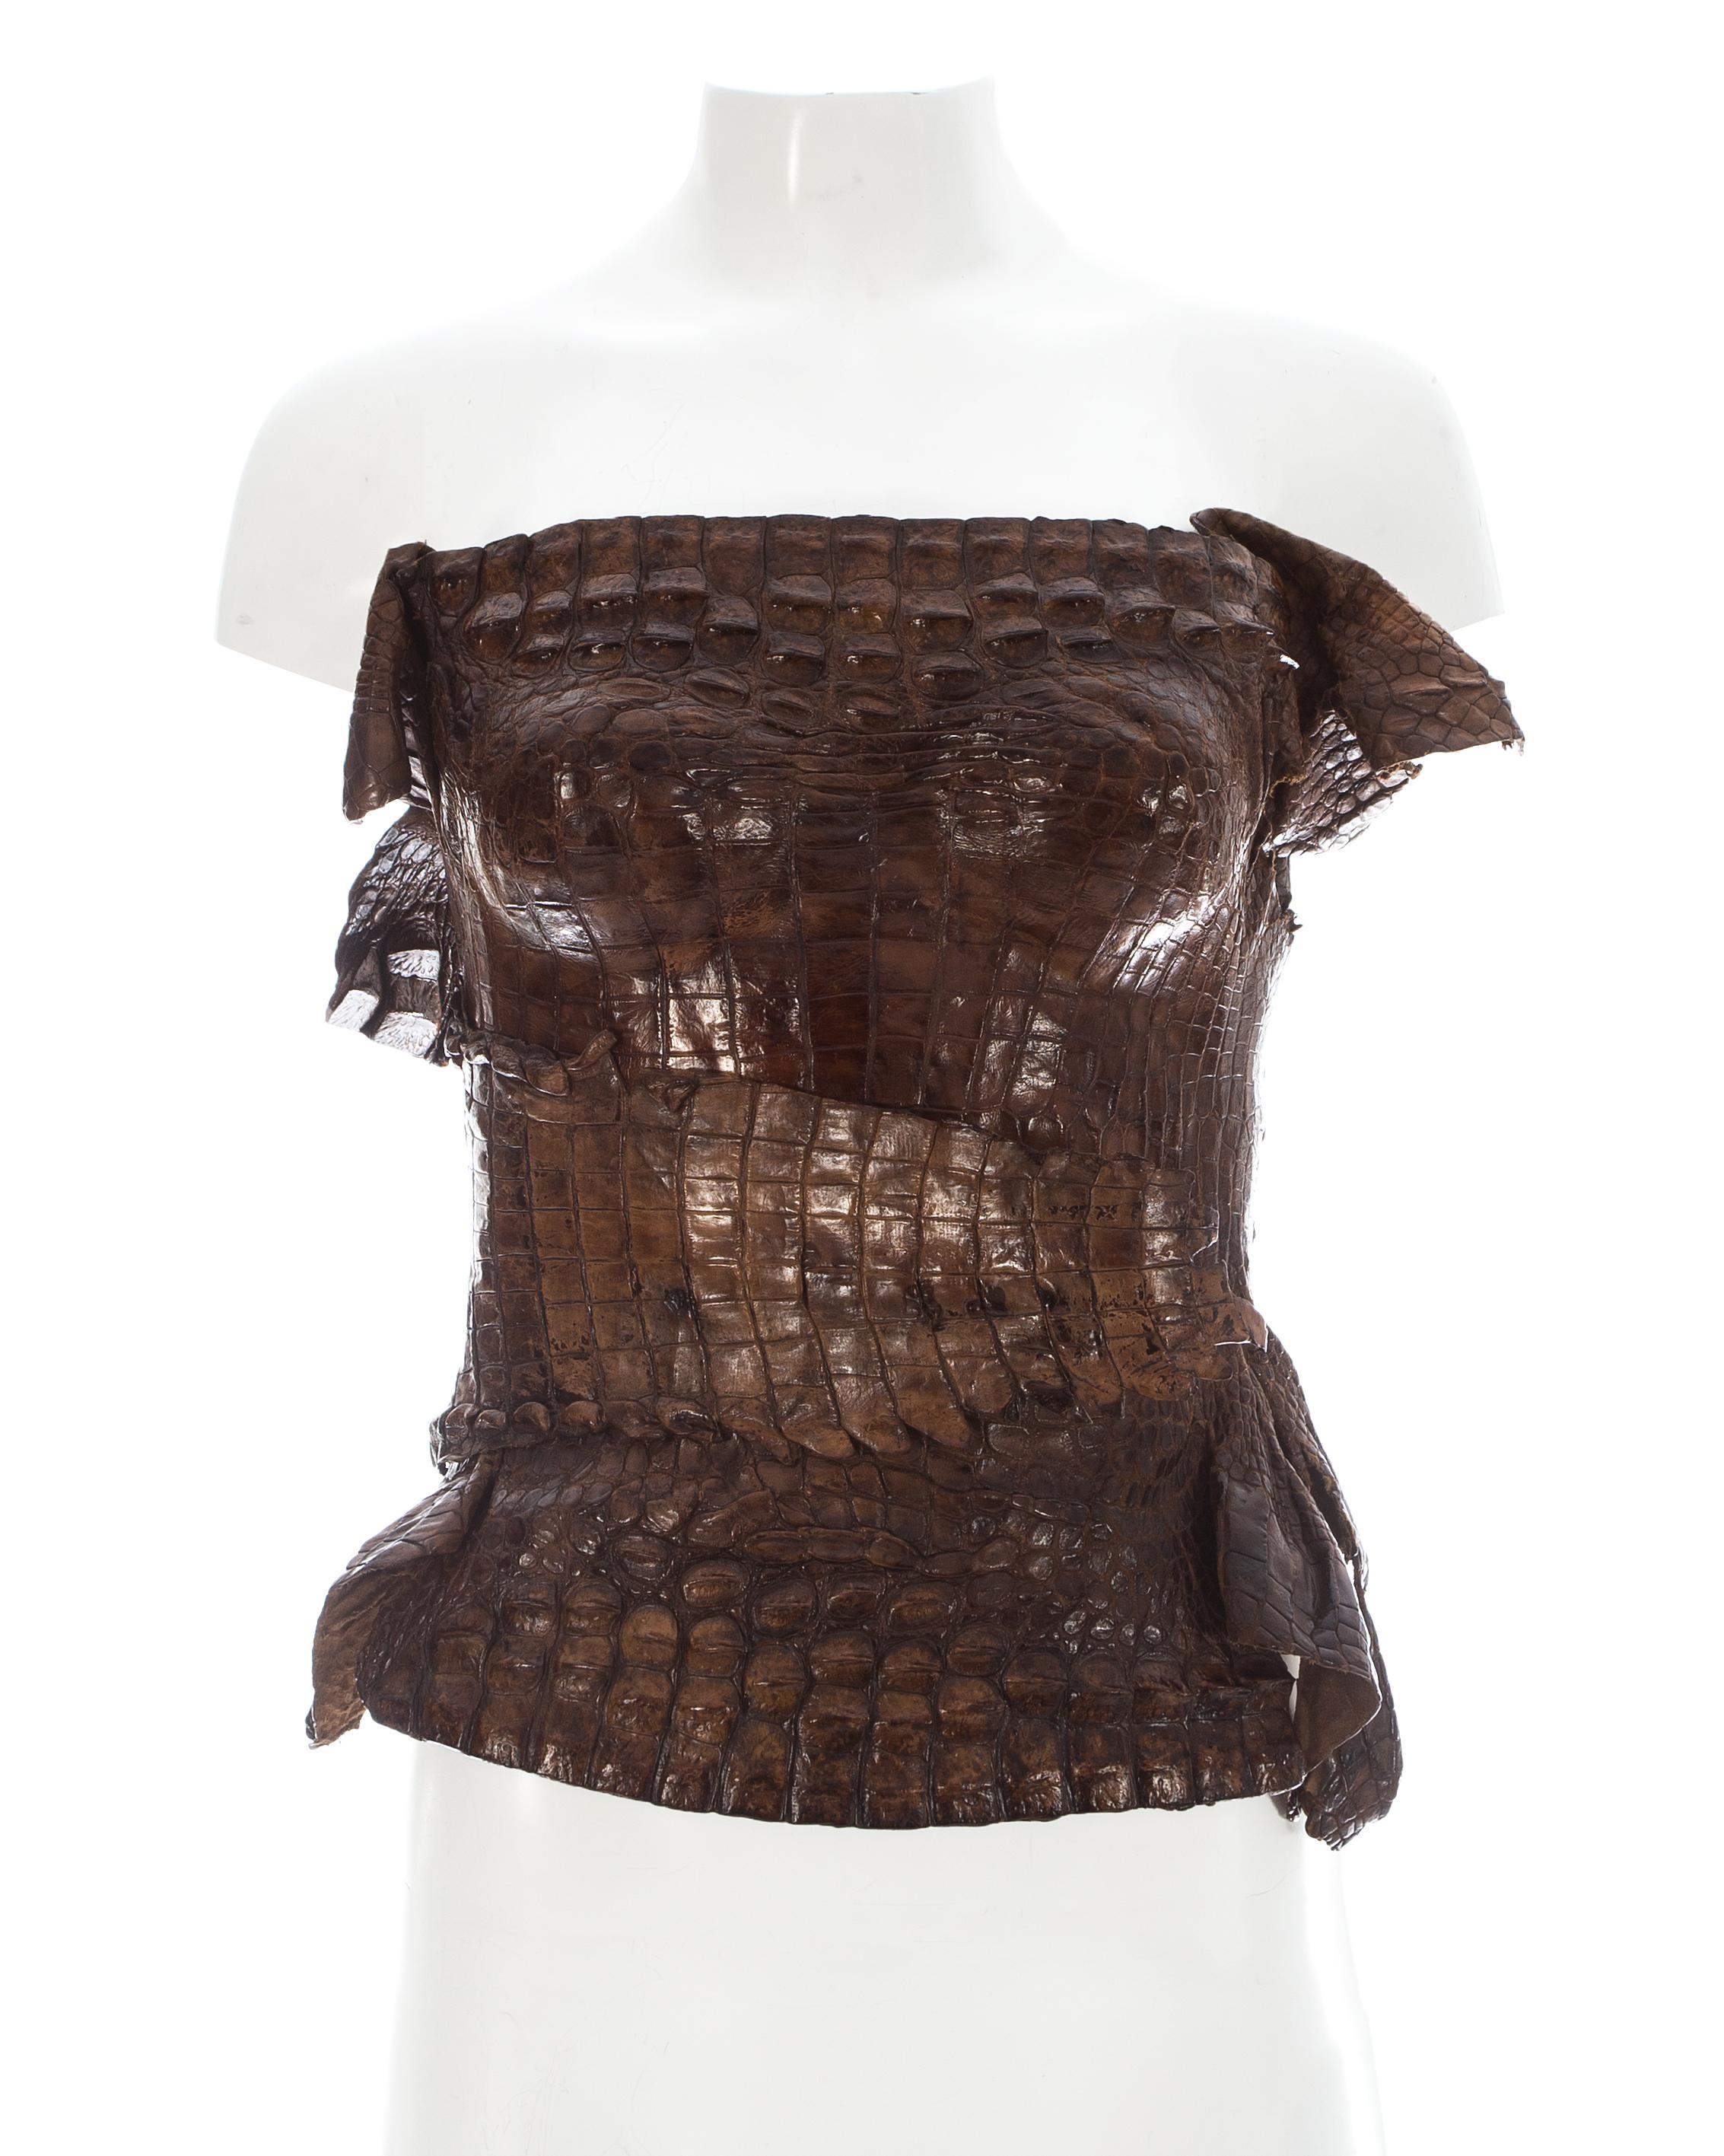 - Full crocodile skin with raw edge 
- Wrap design with adjustable metal clasp closure 
- Moulded bust 

c. 2000s